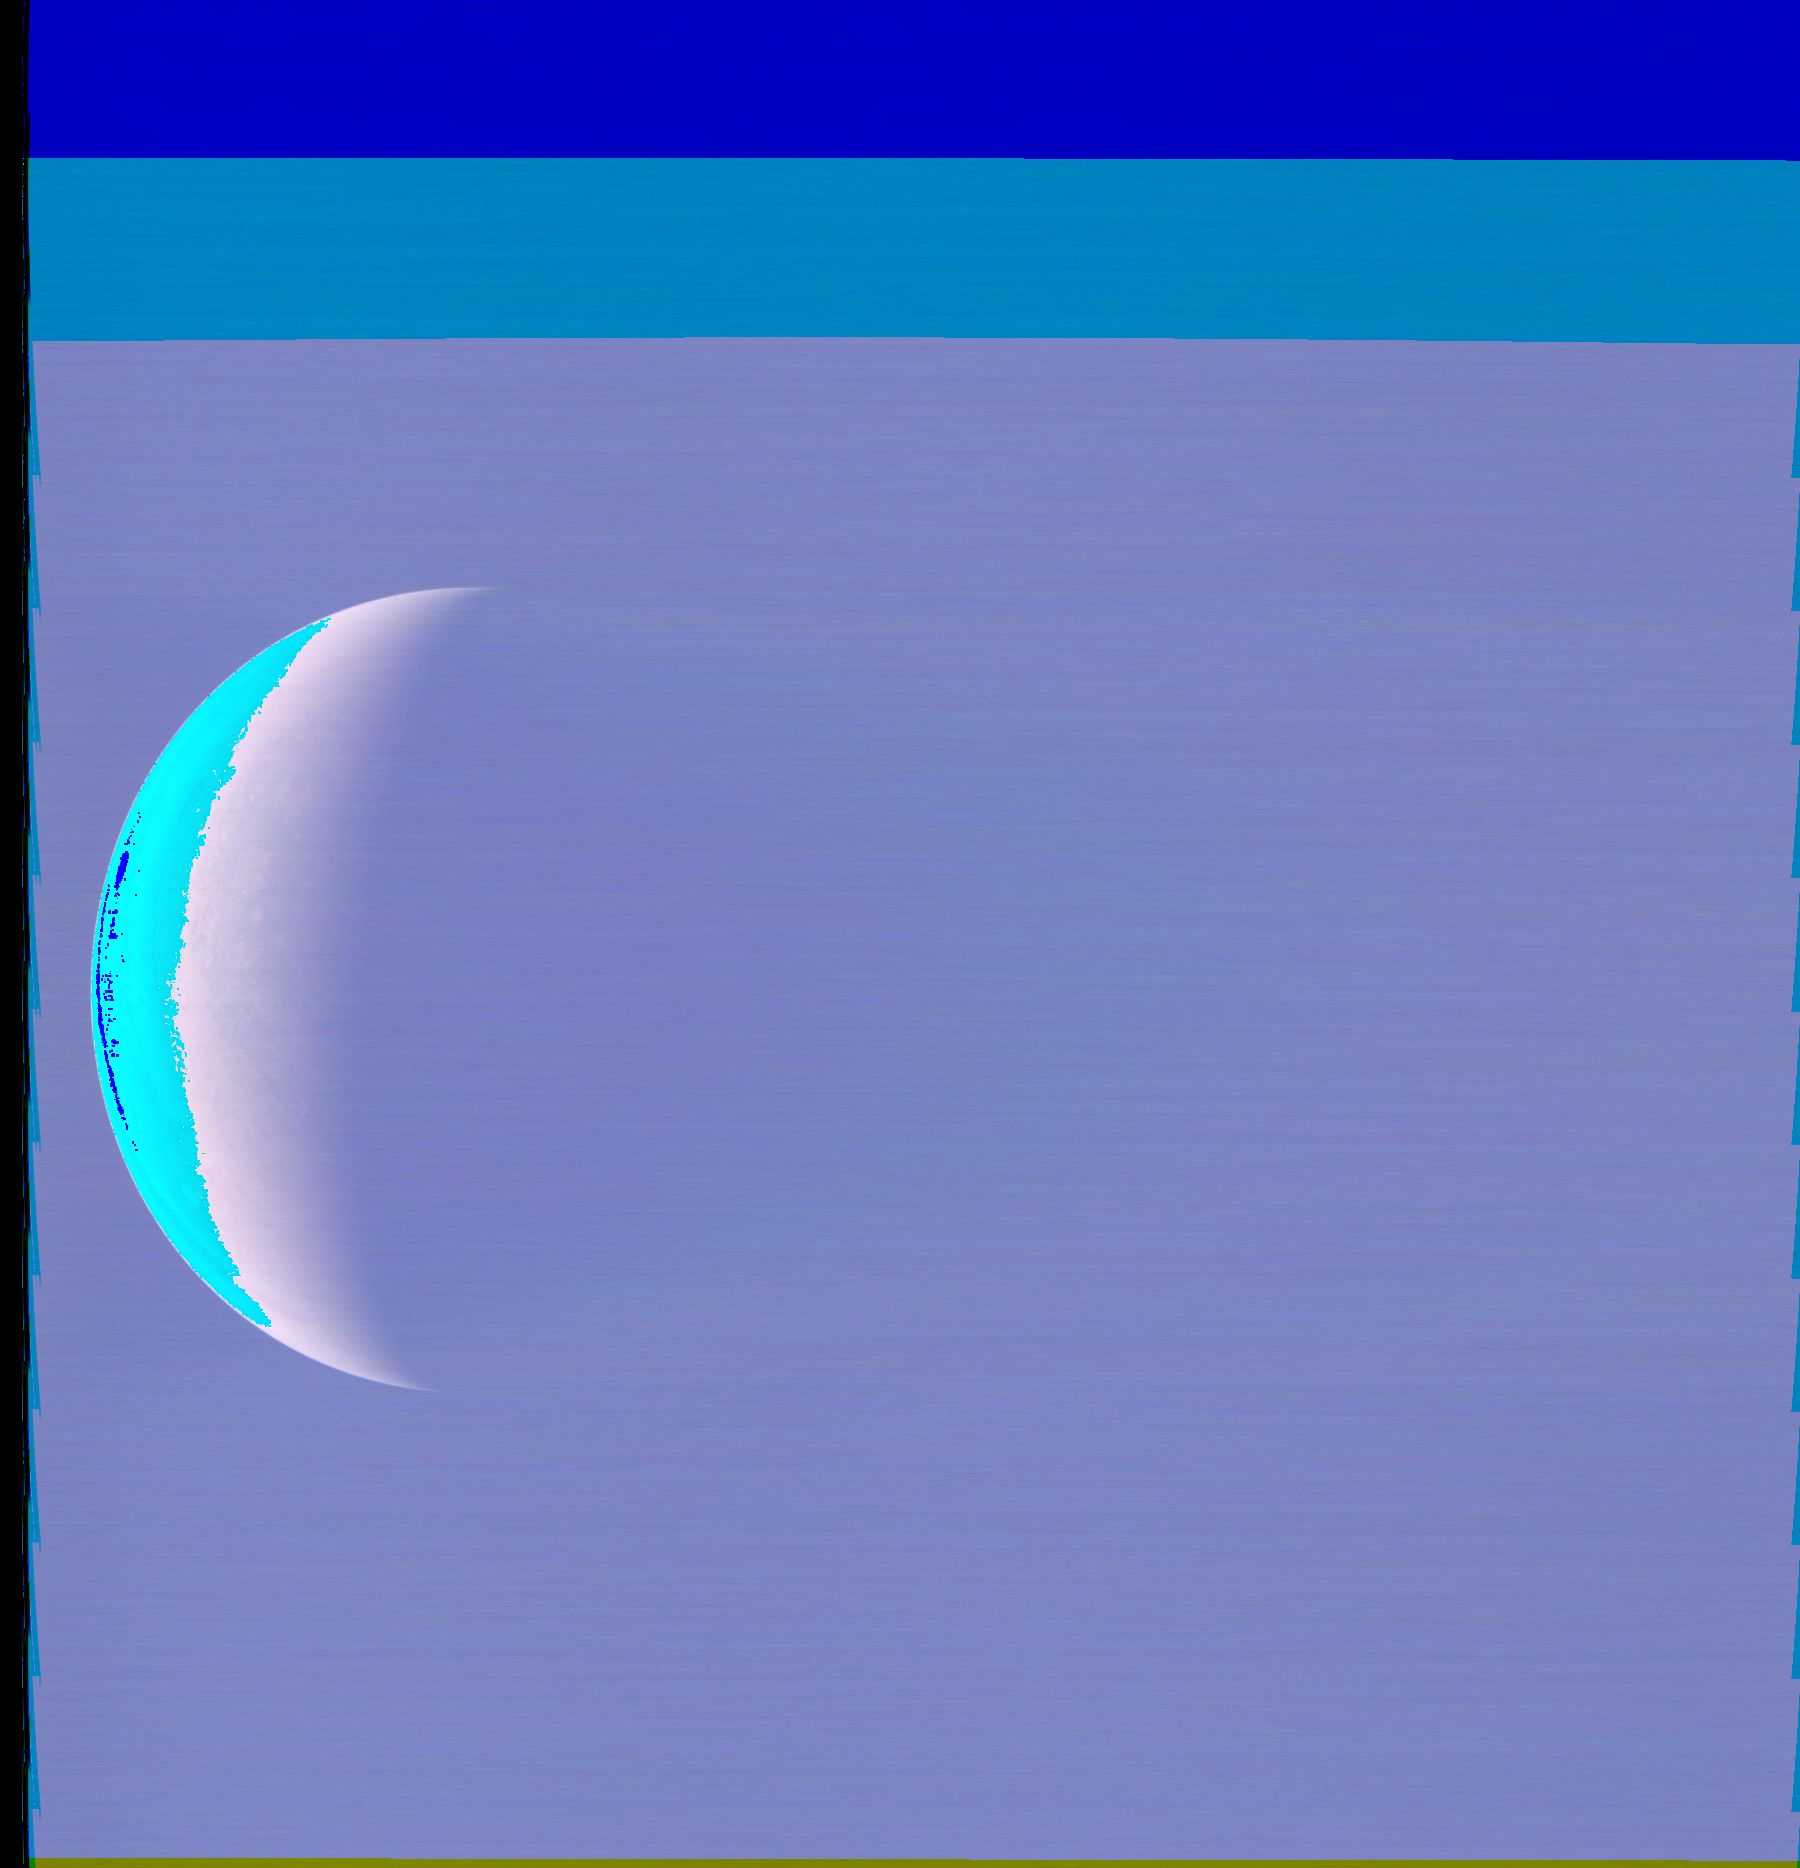 JNCE_2023326_56C00189_V01-raw_proc_hollow_sphere_c_pj_out.BMP_thumbnail_.png